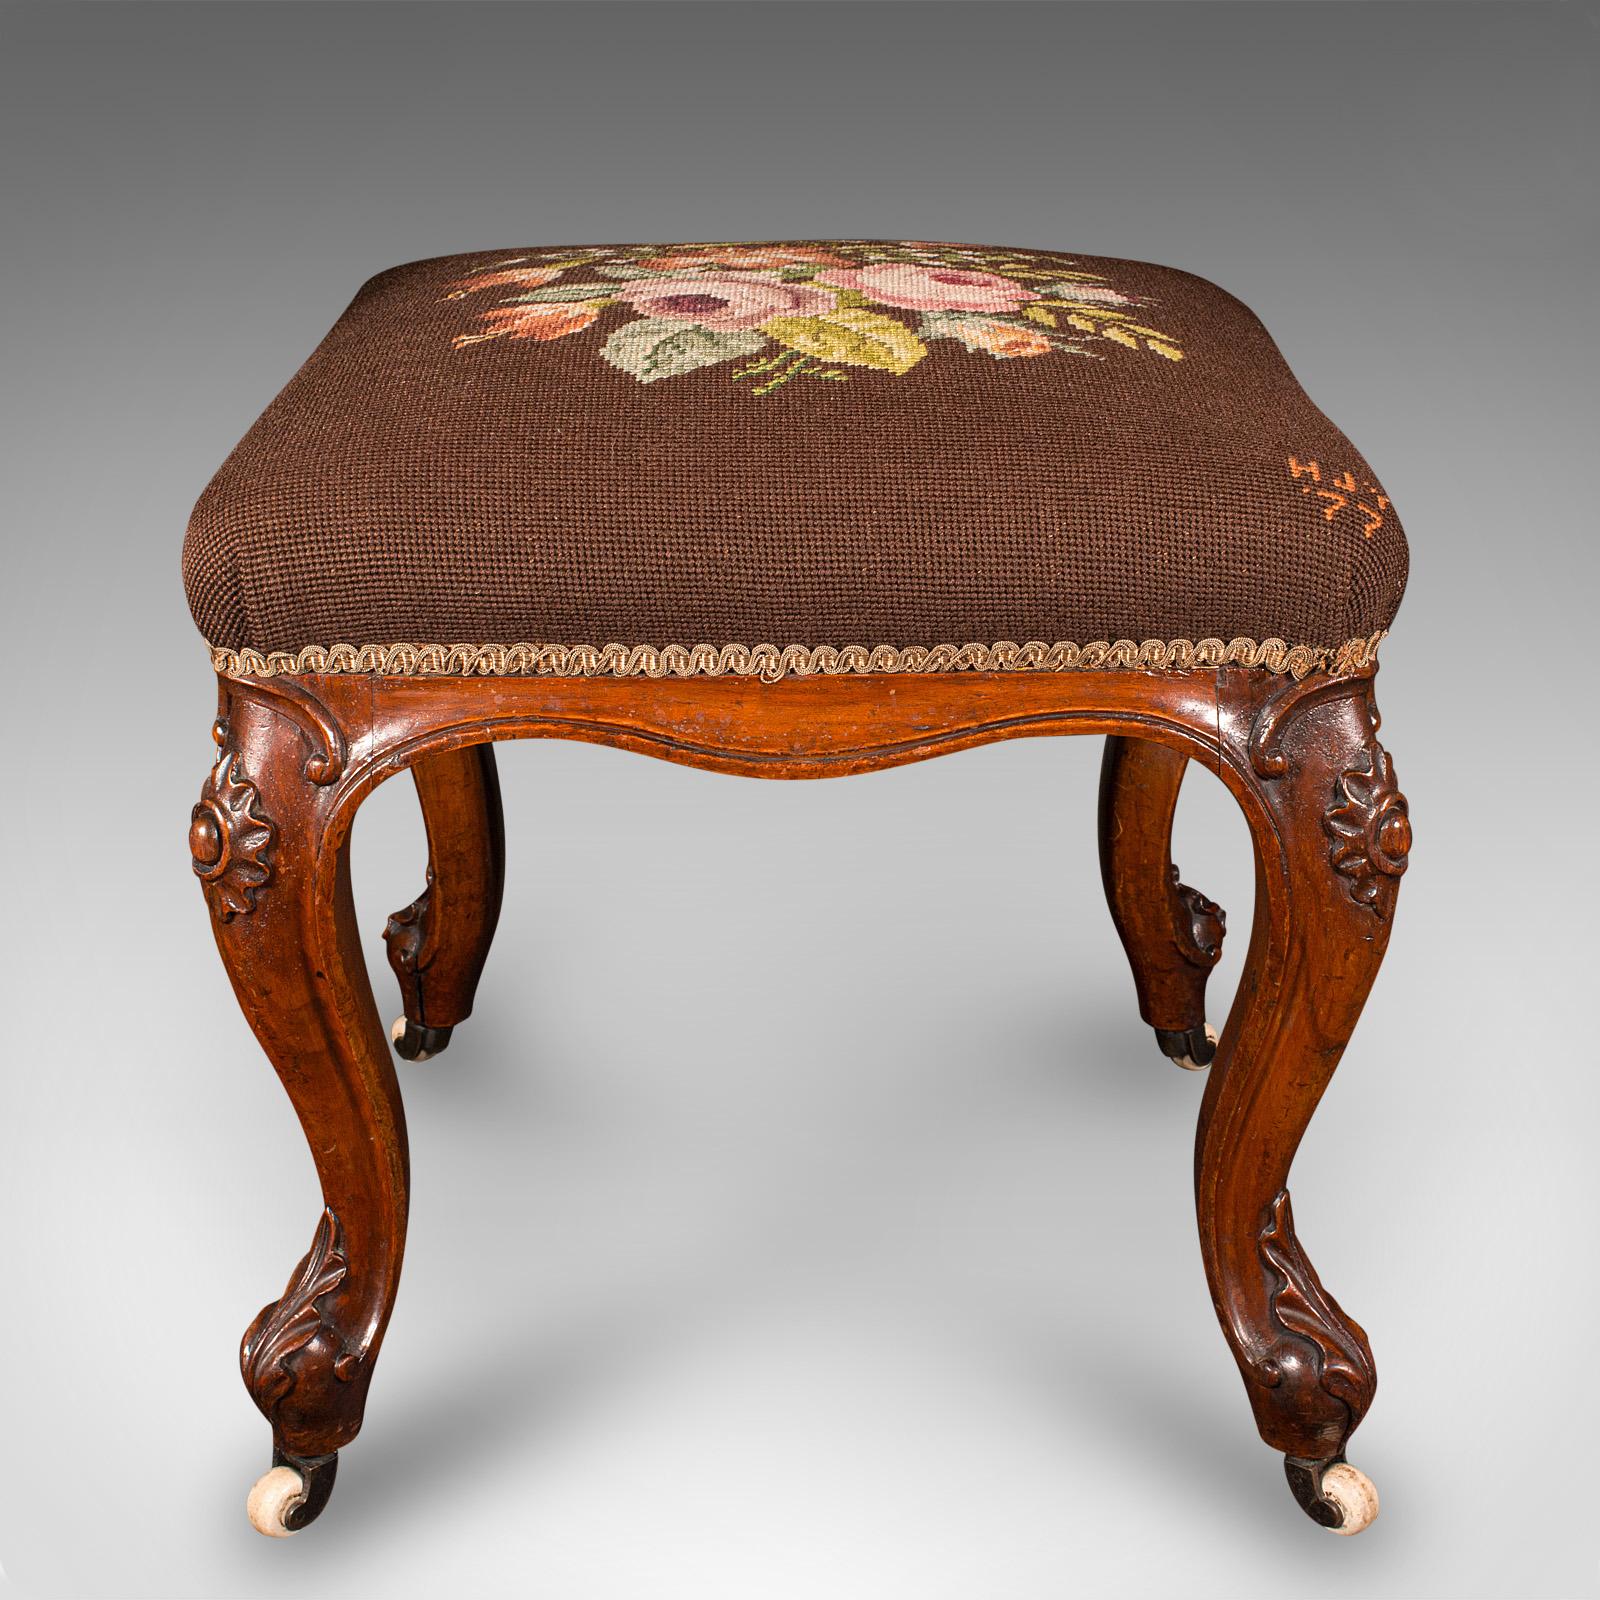 This is an antique dressing stool. An English, walnut and needlepoint footstool, dating to the early Victorian period, circa 1840.

Delightful needlepoint cushion over a finely crafted frame
Displays a desirable aged patina and in good order
Quality